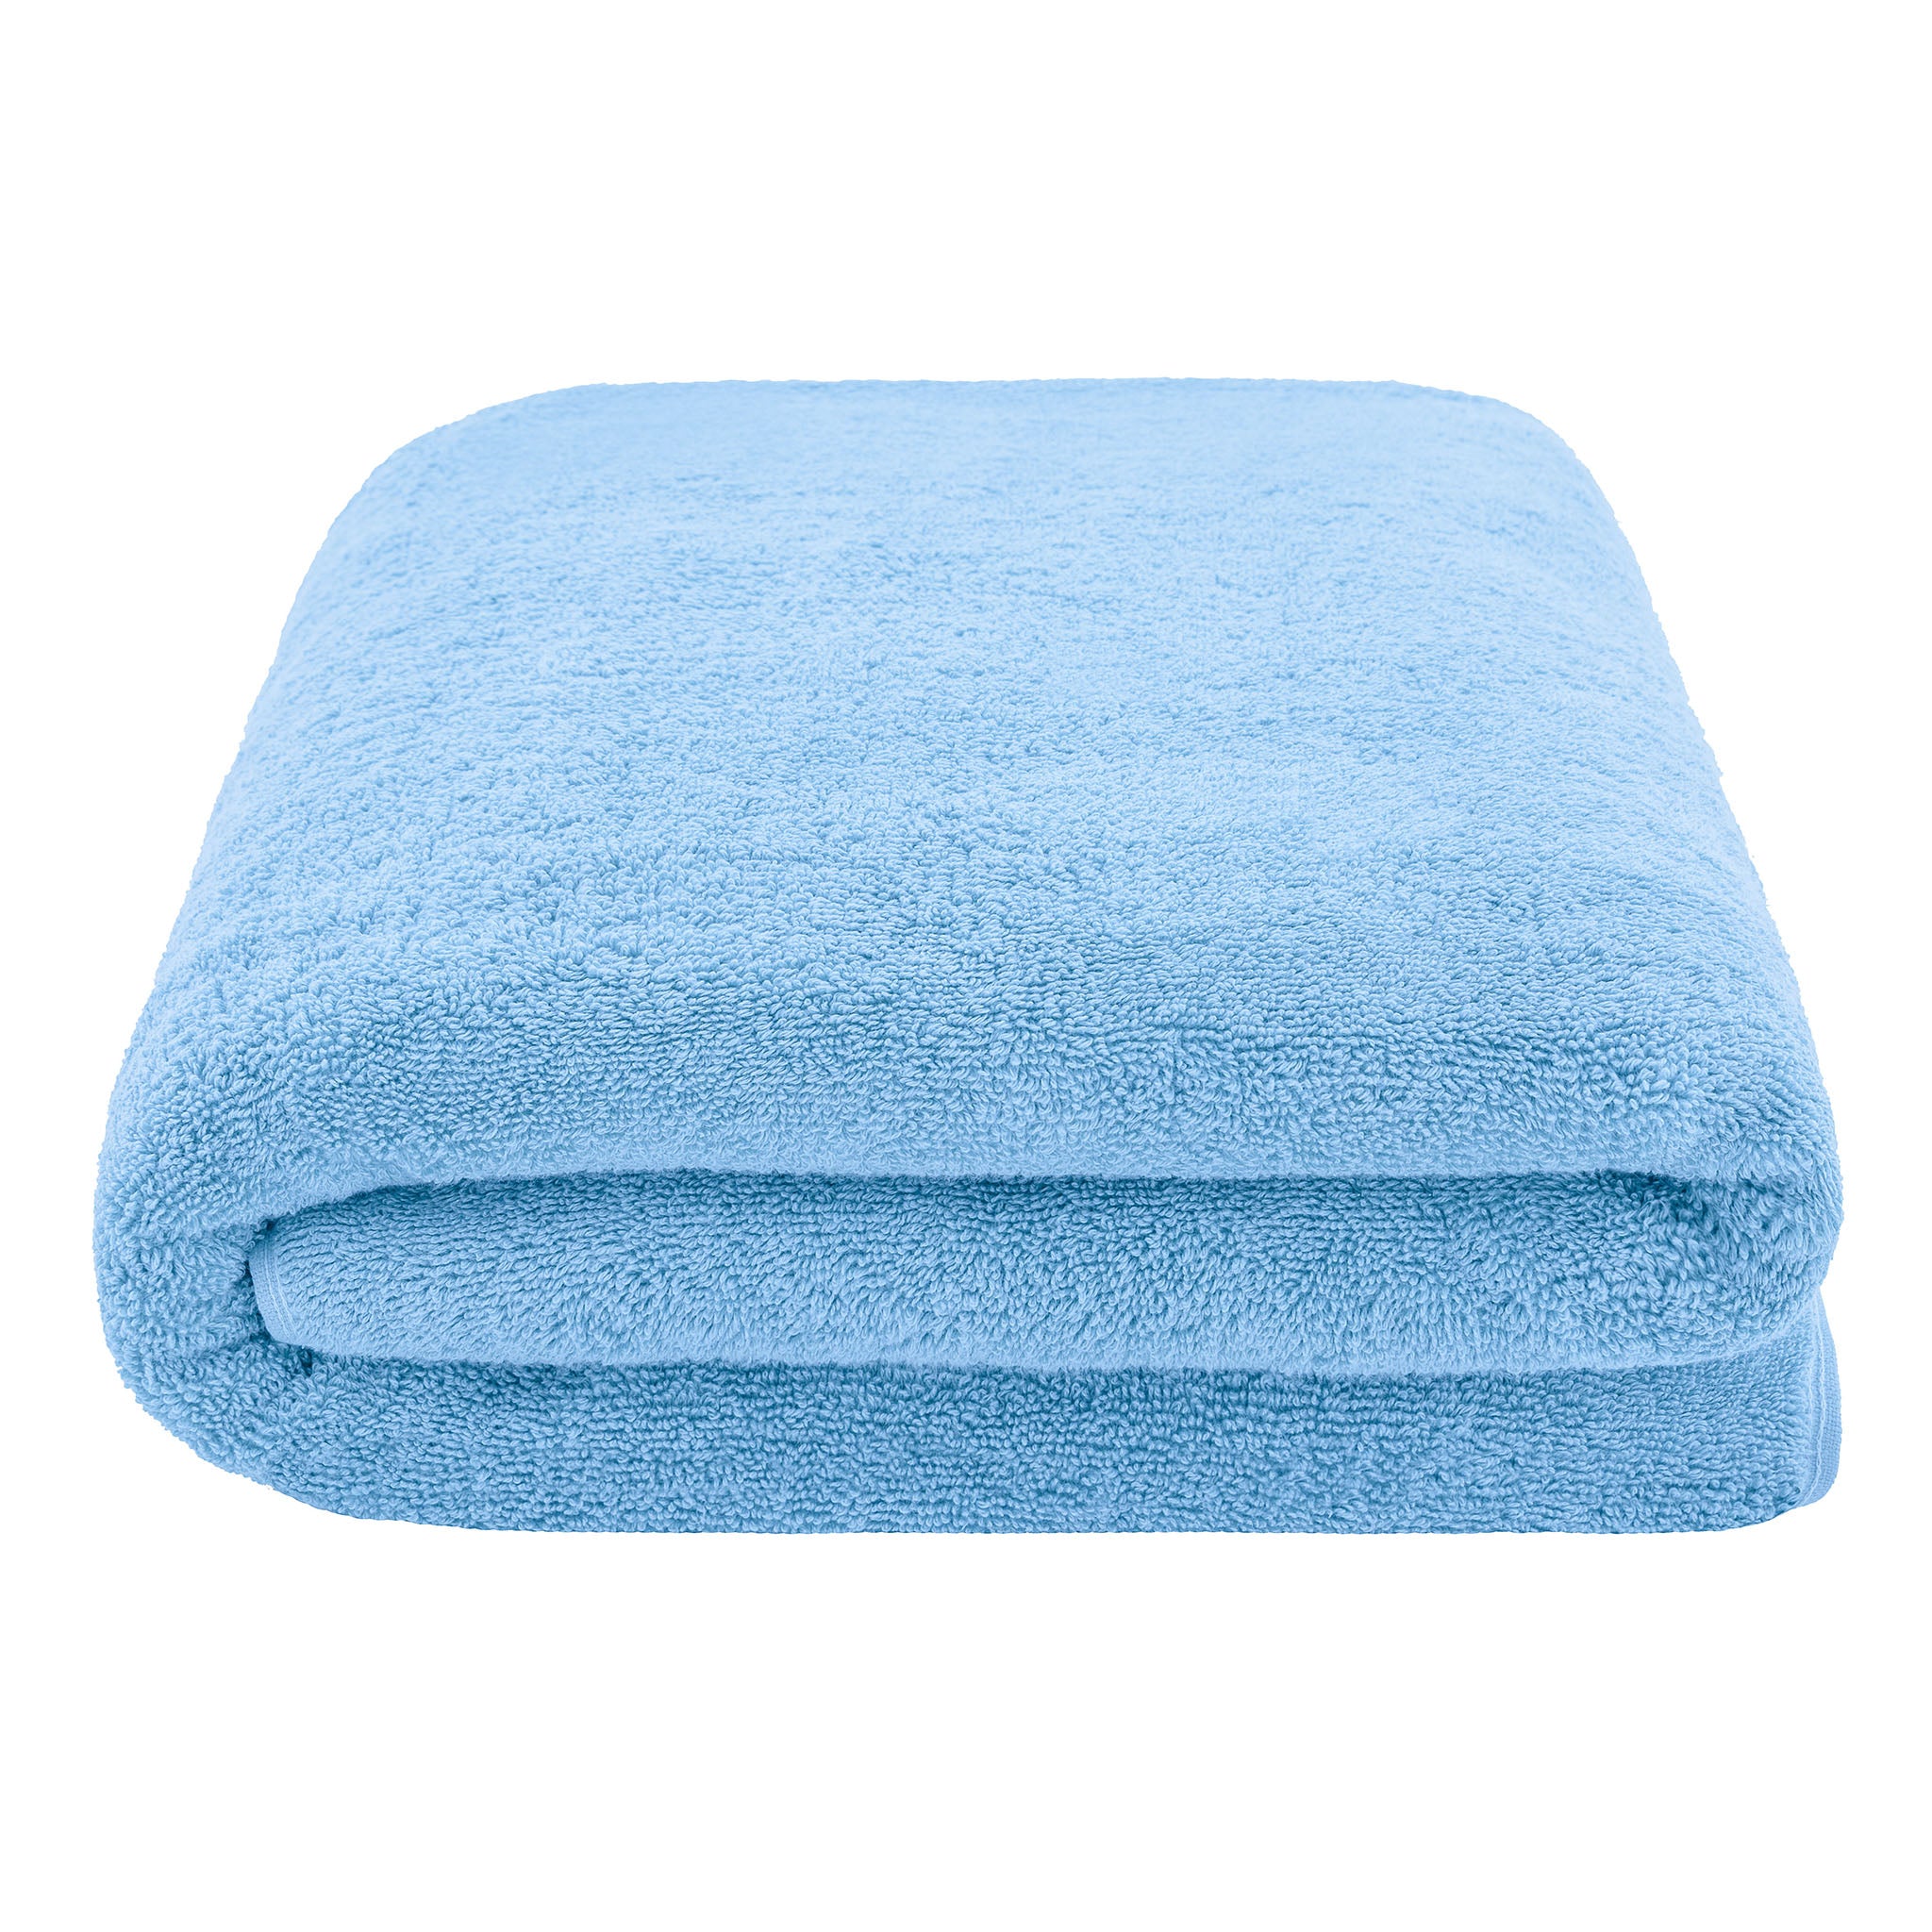 American Soft Linen 100% Ring Spun Cotton 40x80 Inches Oversized Bath Sheets sky-blue-3